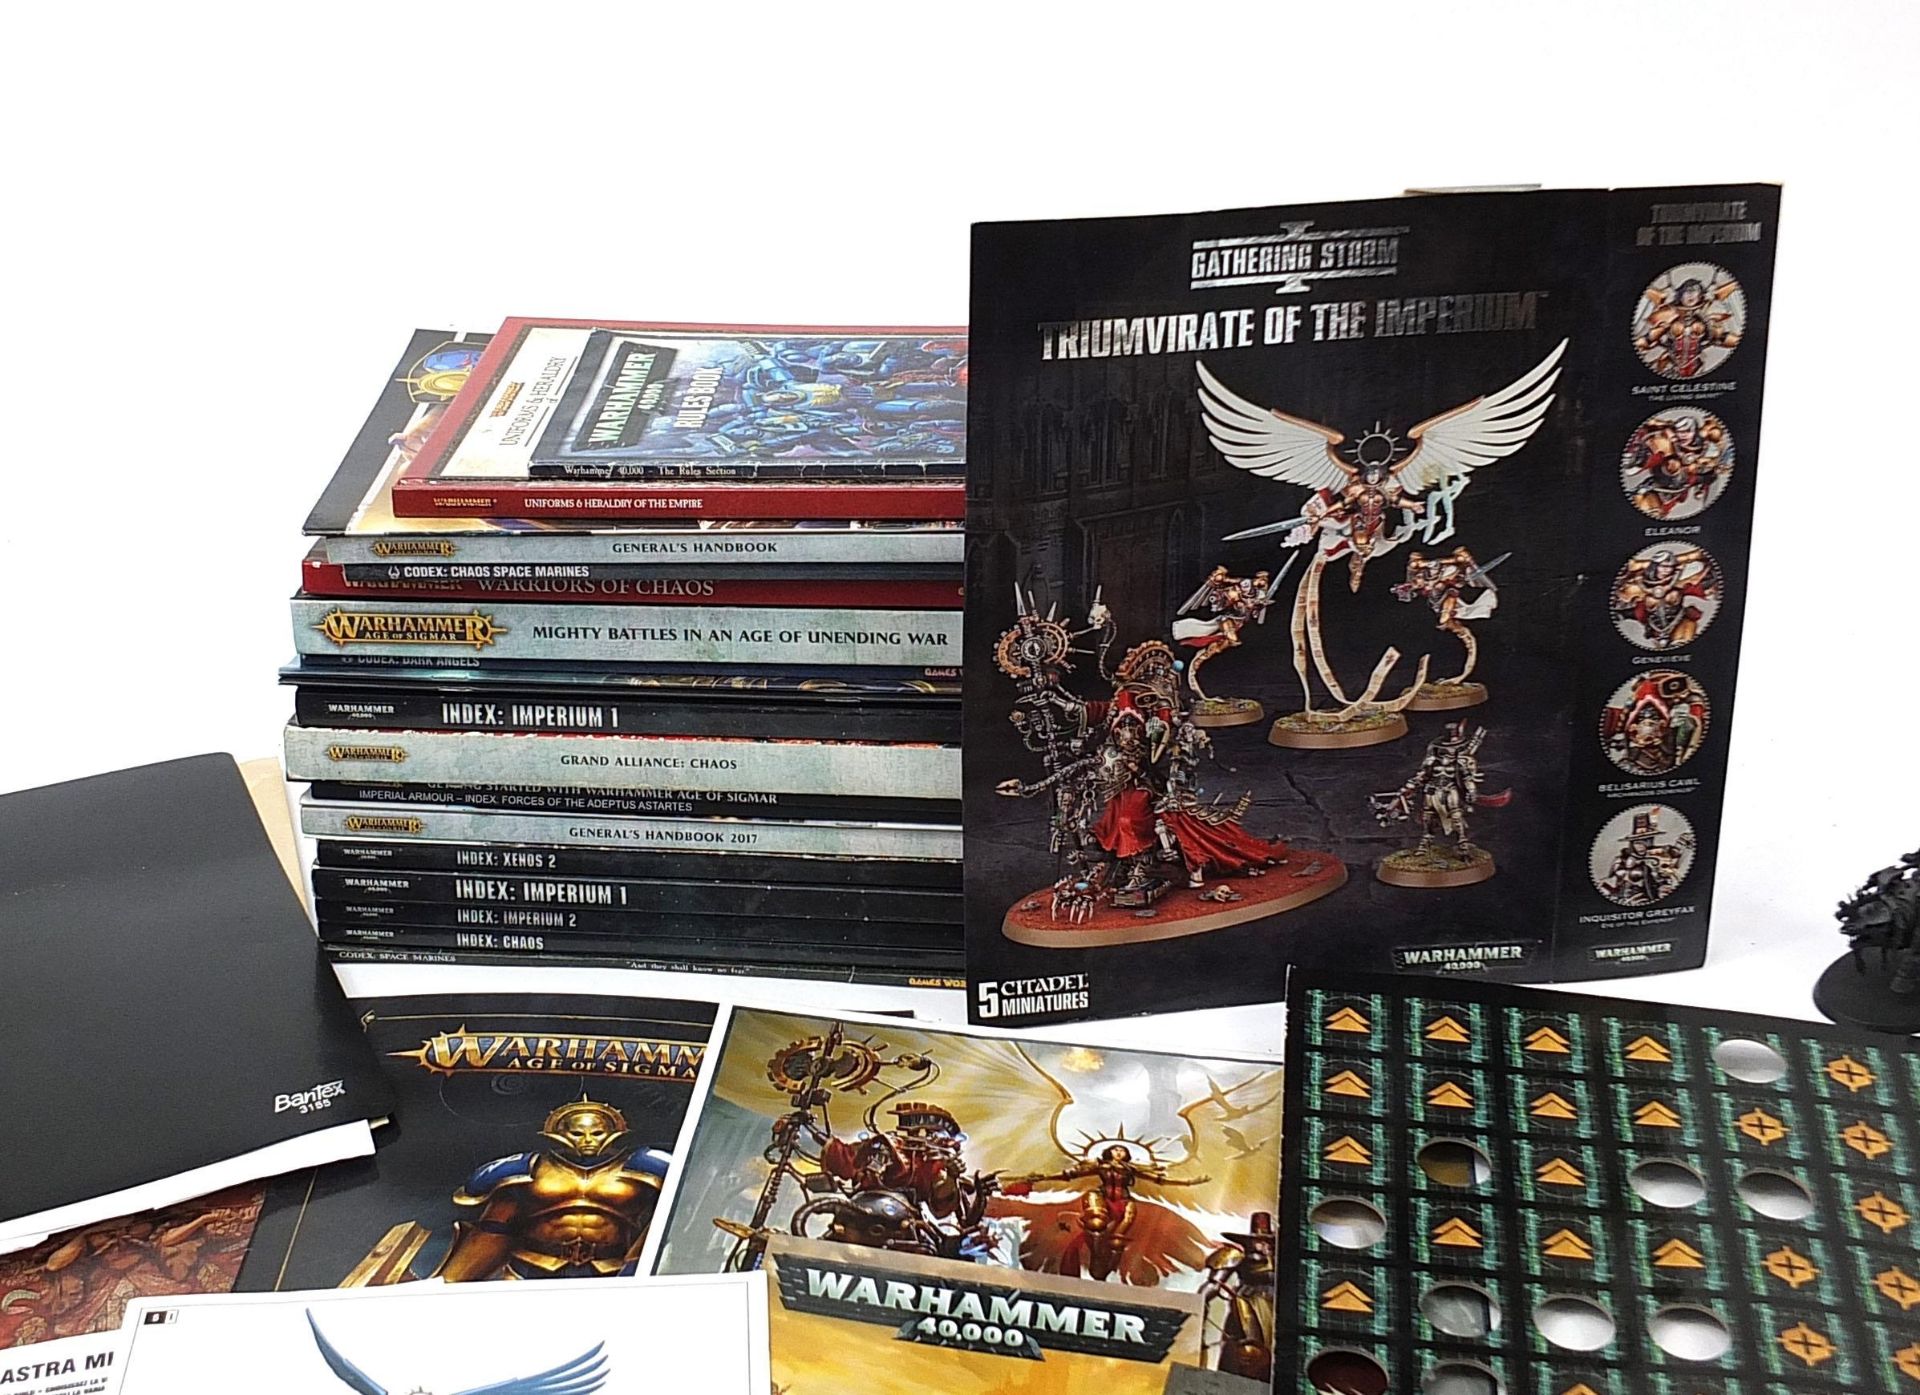 Extensive collection of Warhammer figures and magazines including Blood Warriors, Tyranid - Image 10 of 16